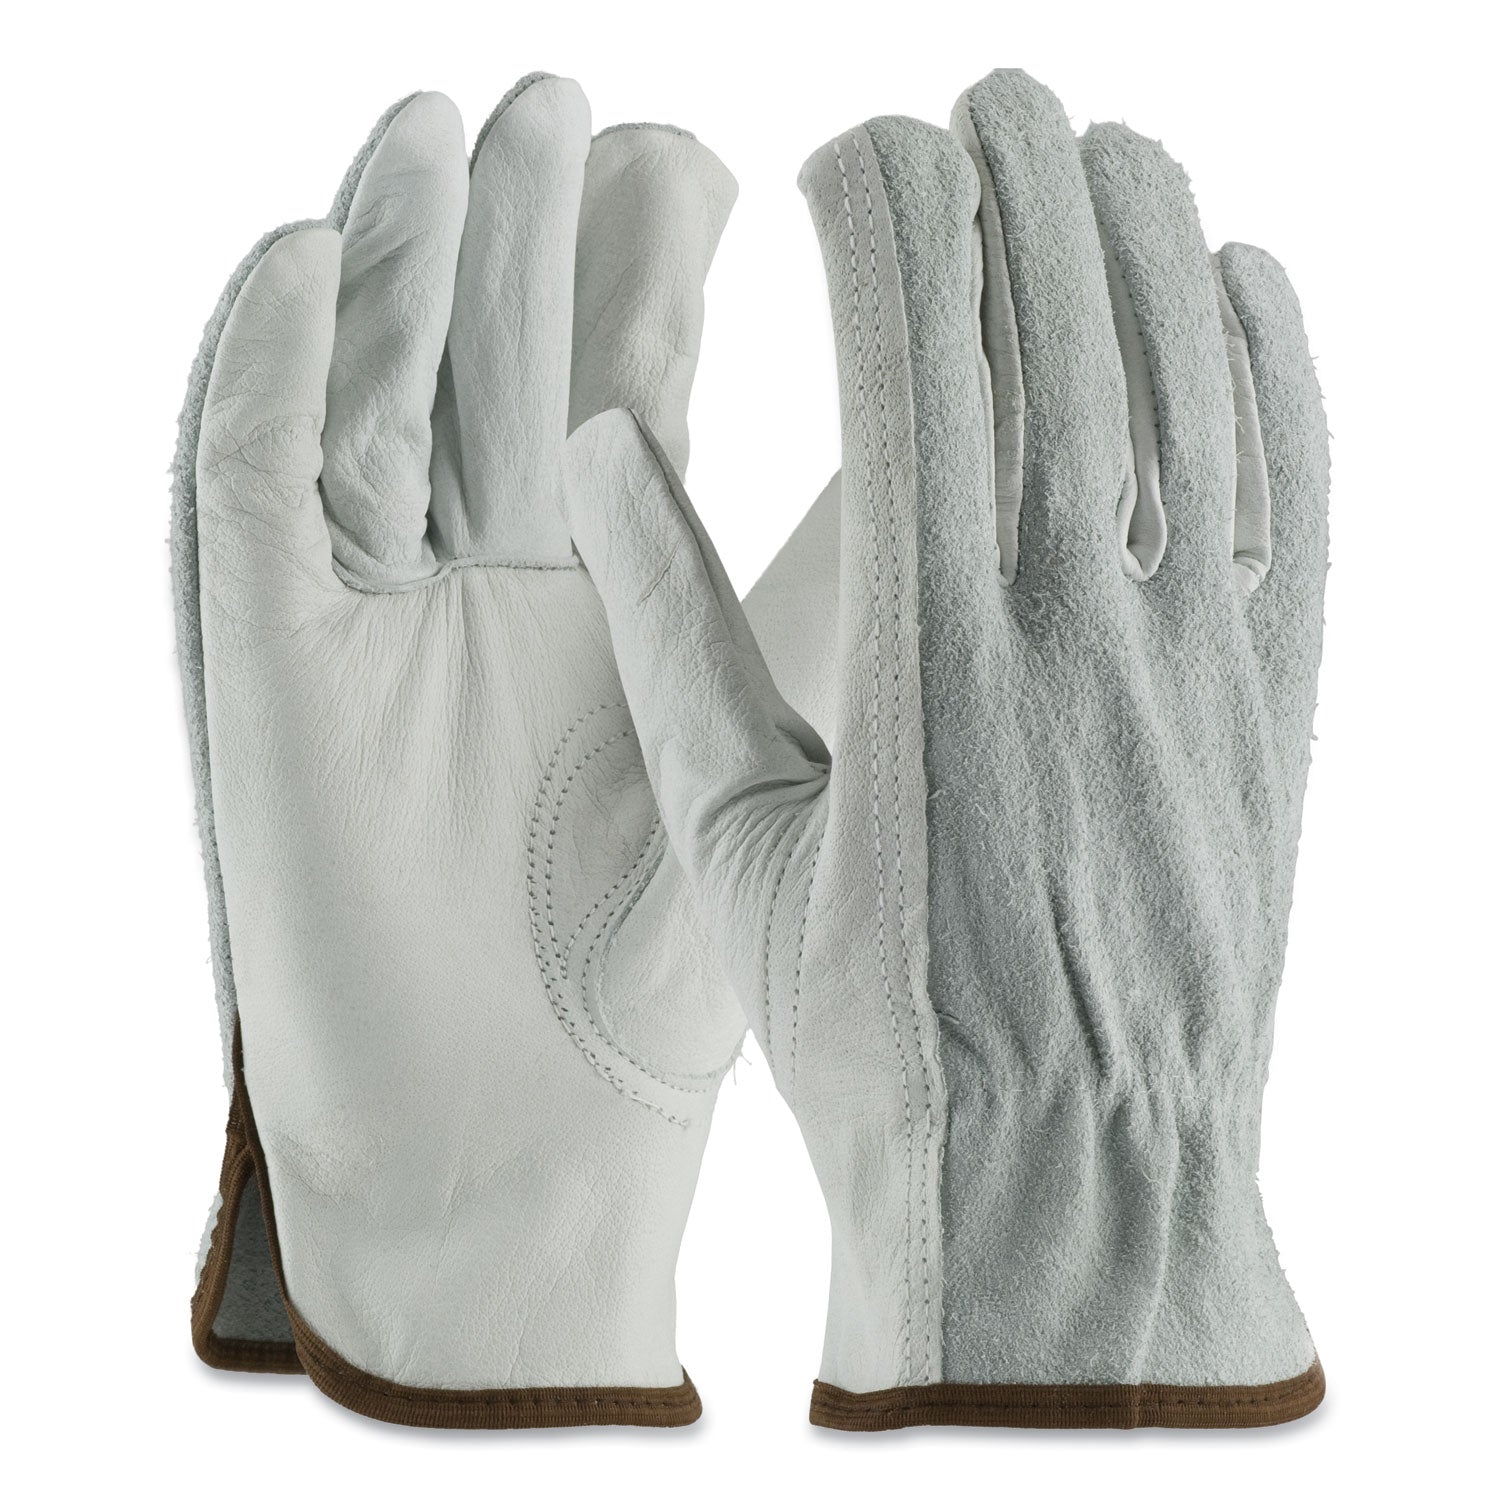 top-grain-leather-drivers-gloves-with-shoulder-split-cowhide-leather-back-large-gray_pid68161sbl - 1